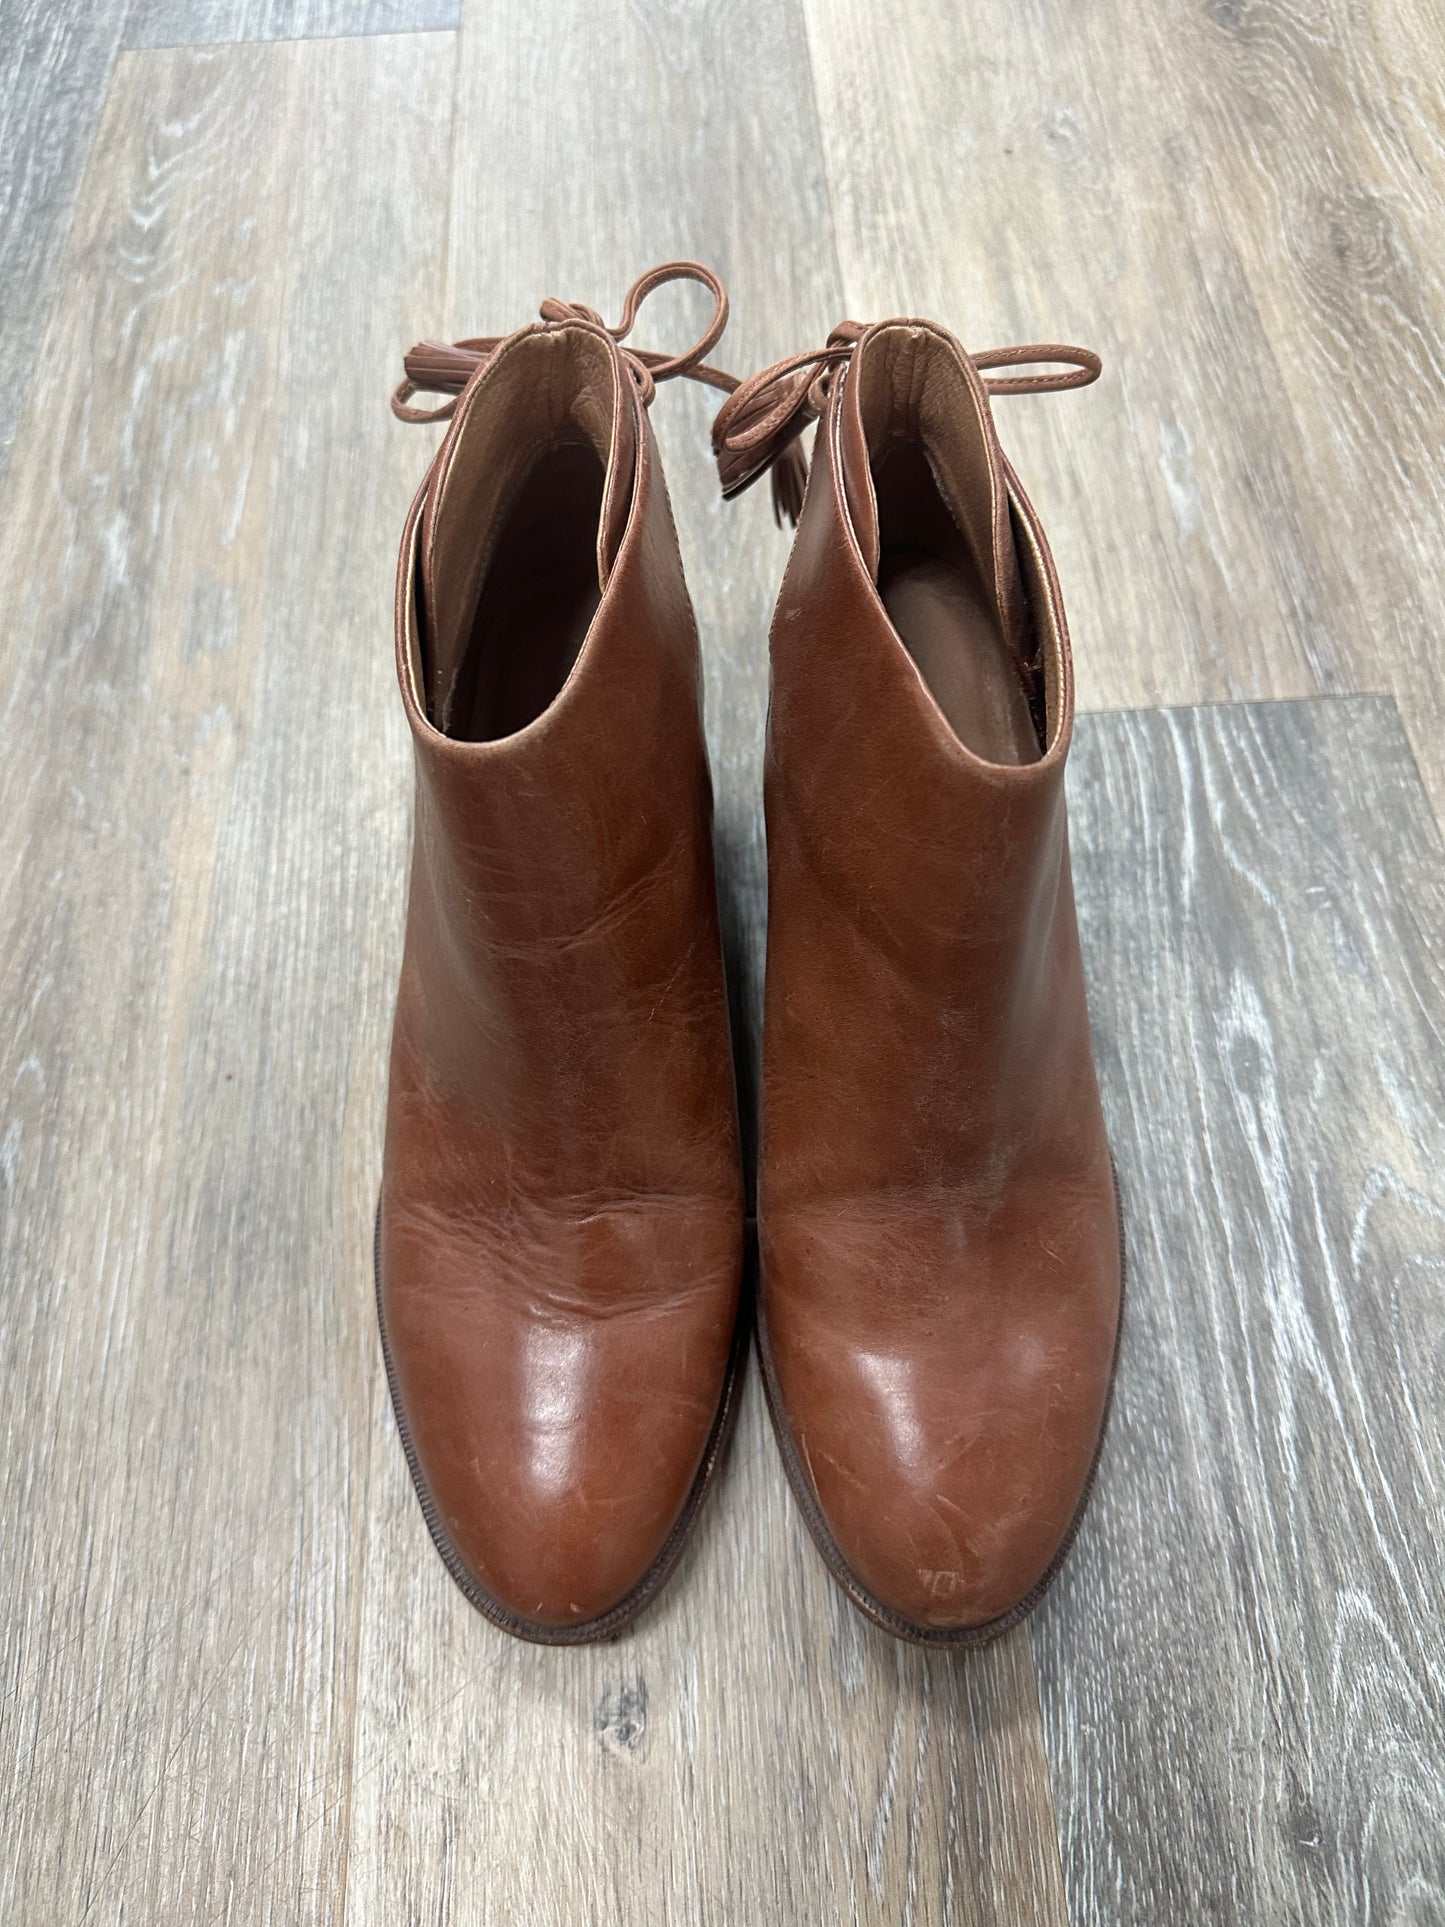 Boots Ankle Flats By Madewell  Size: 9